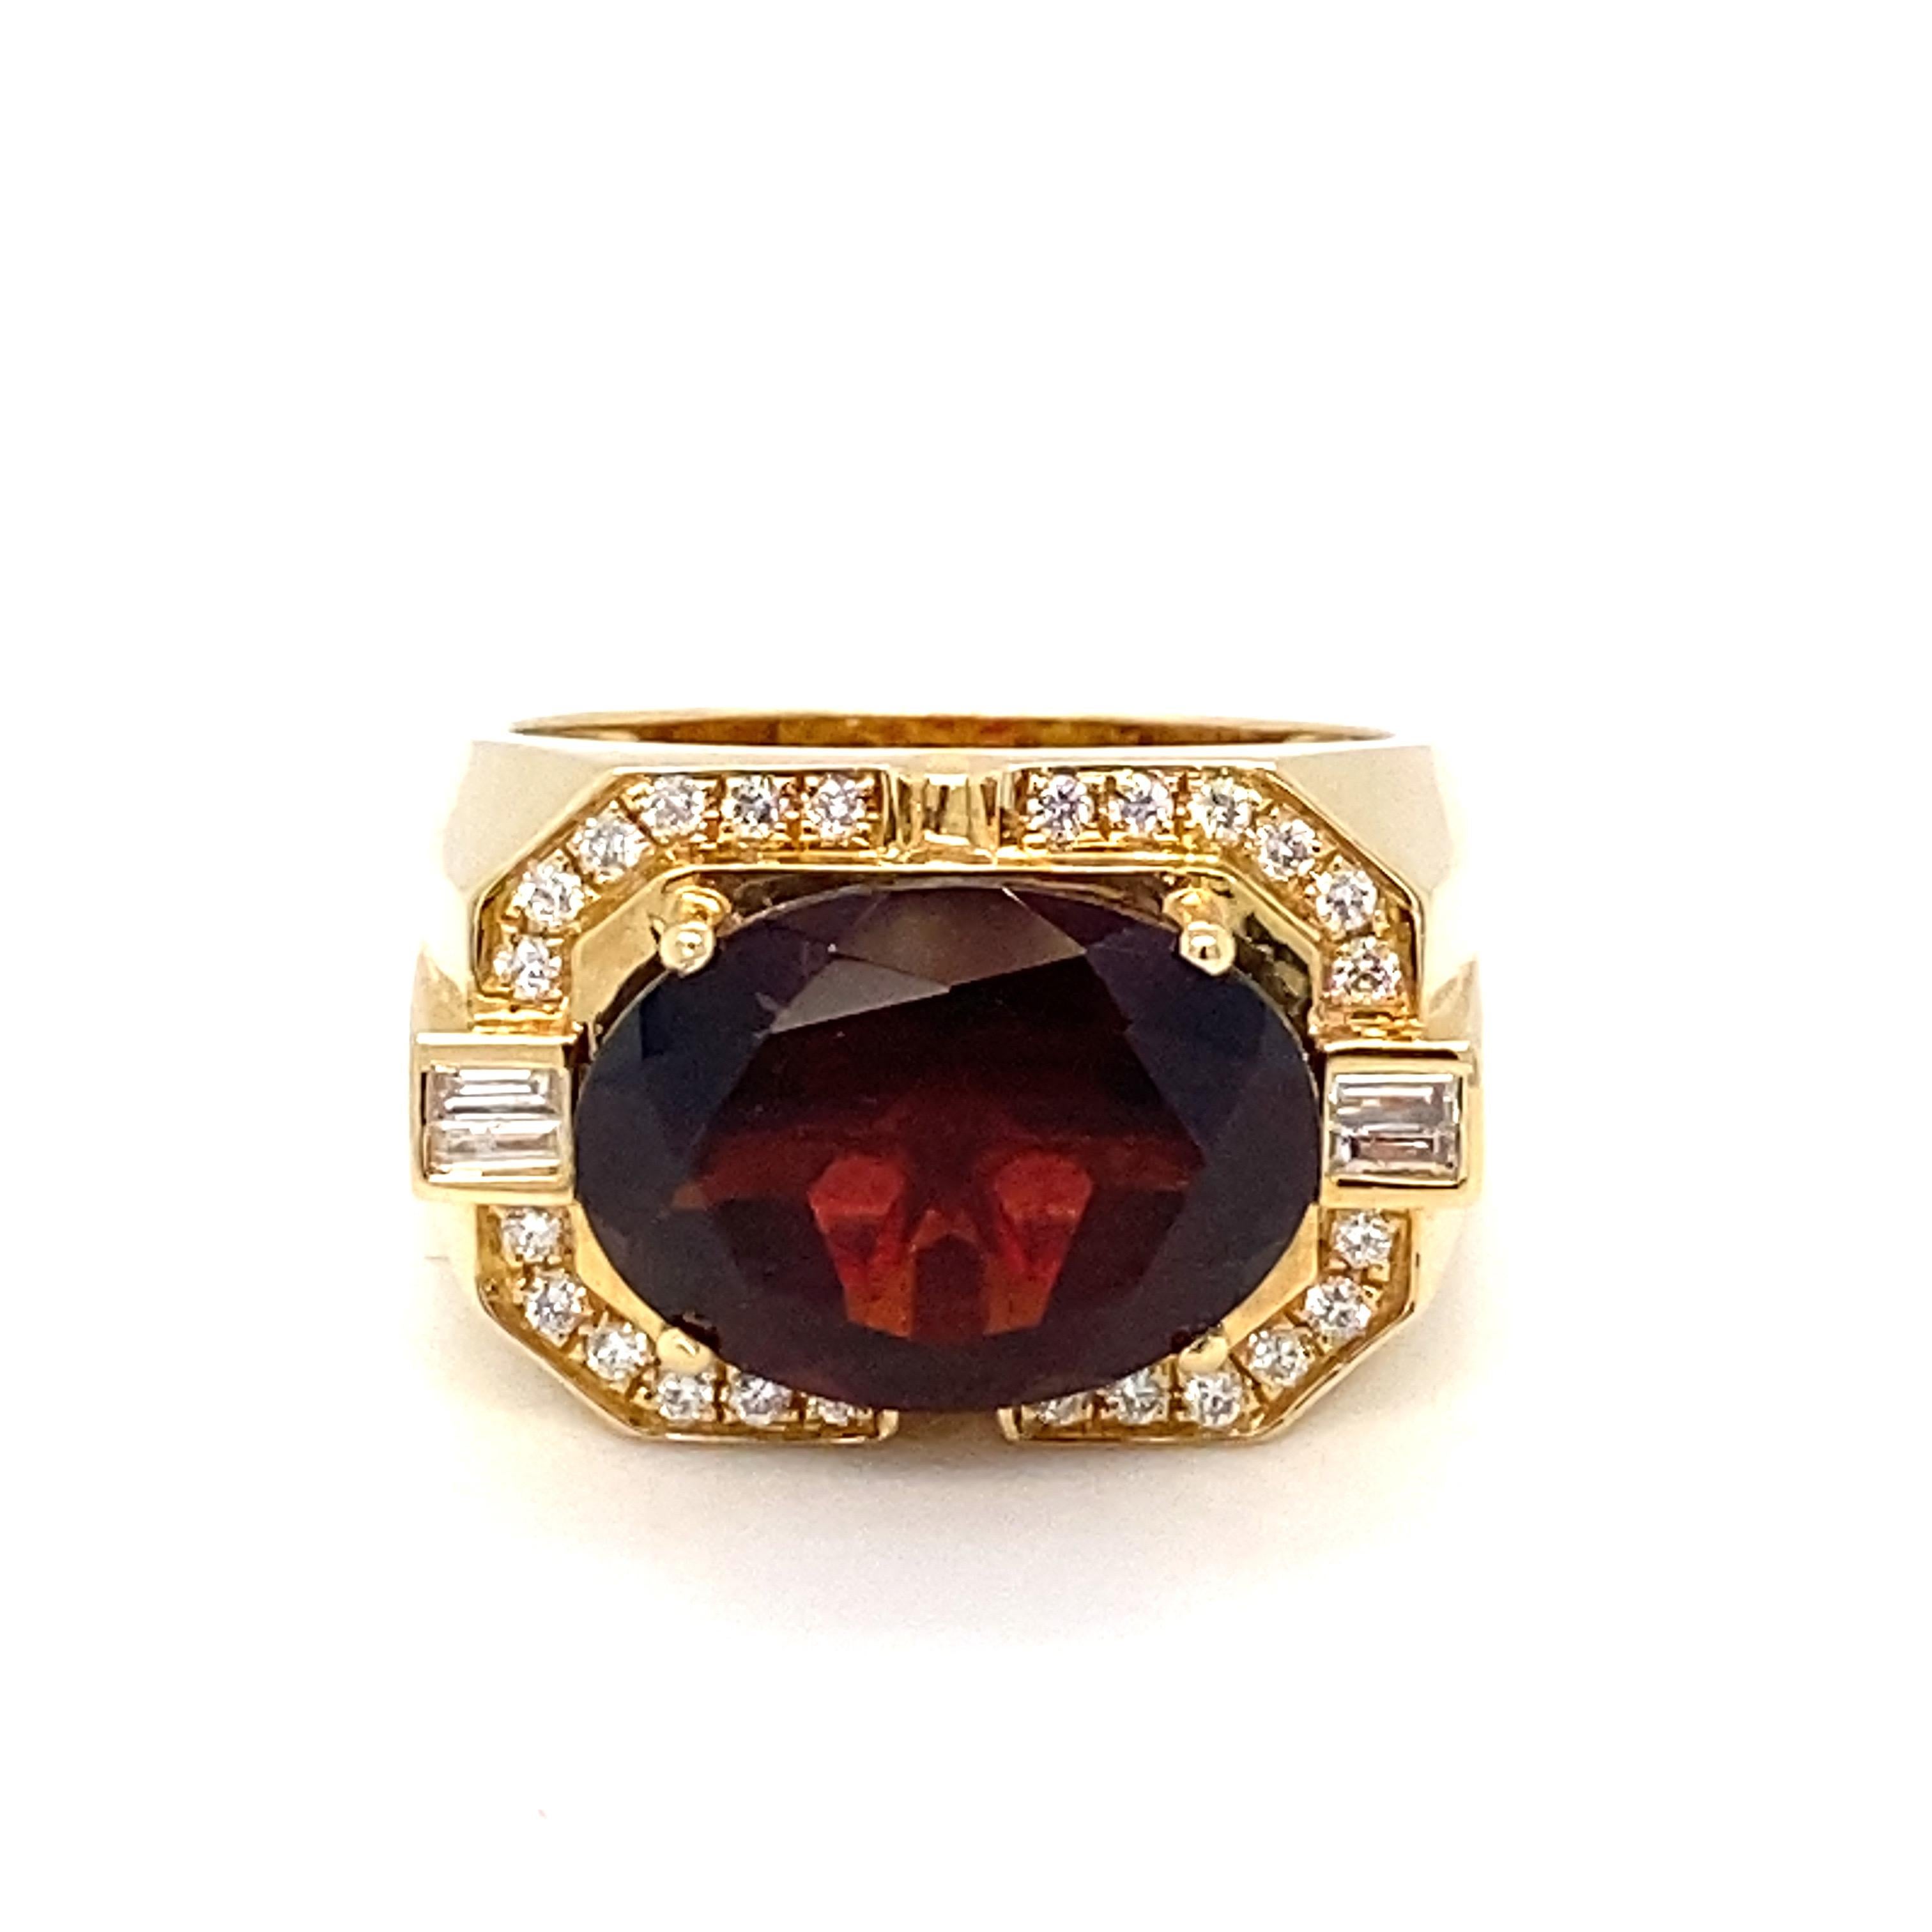 Eye Clean Oval 10.04 Carat Garnet with 0.38  carat white diamond is one of a kind hand crafted Ring. It is currently size 11 and can be resized .The Ring is set in 18K Yellow Gold.

Comfort fit under gallery makes it easy to wear the ring.
